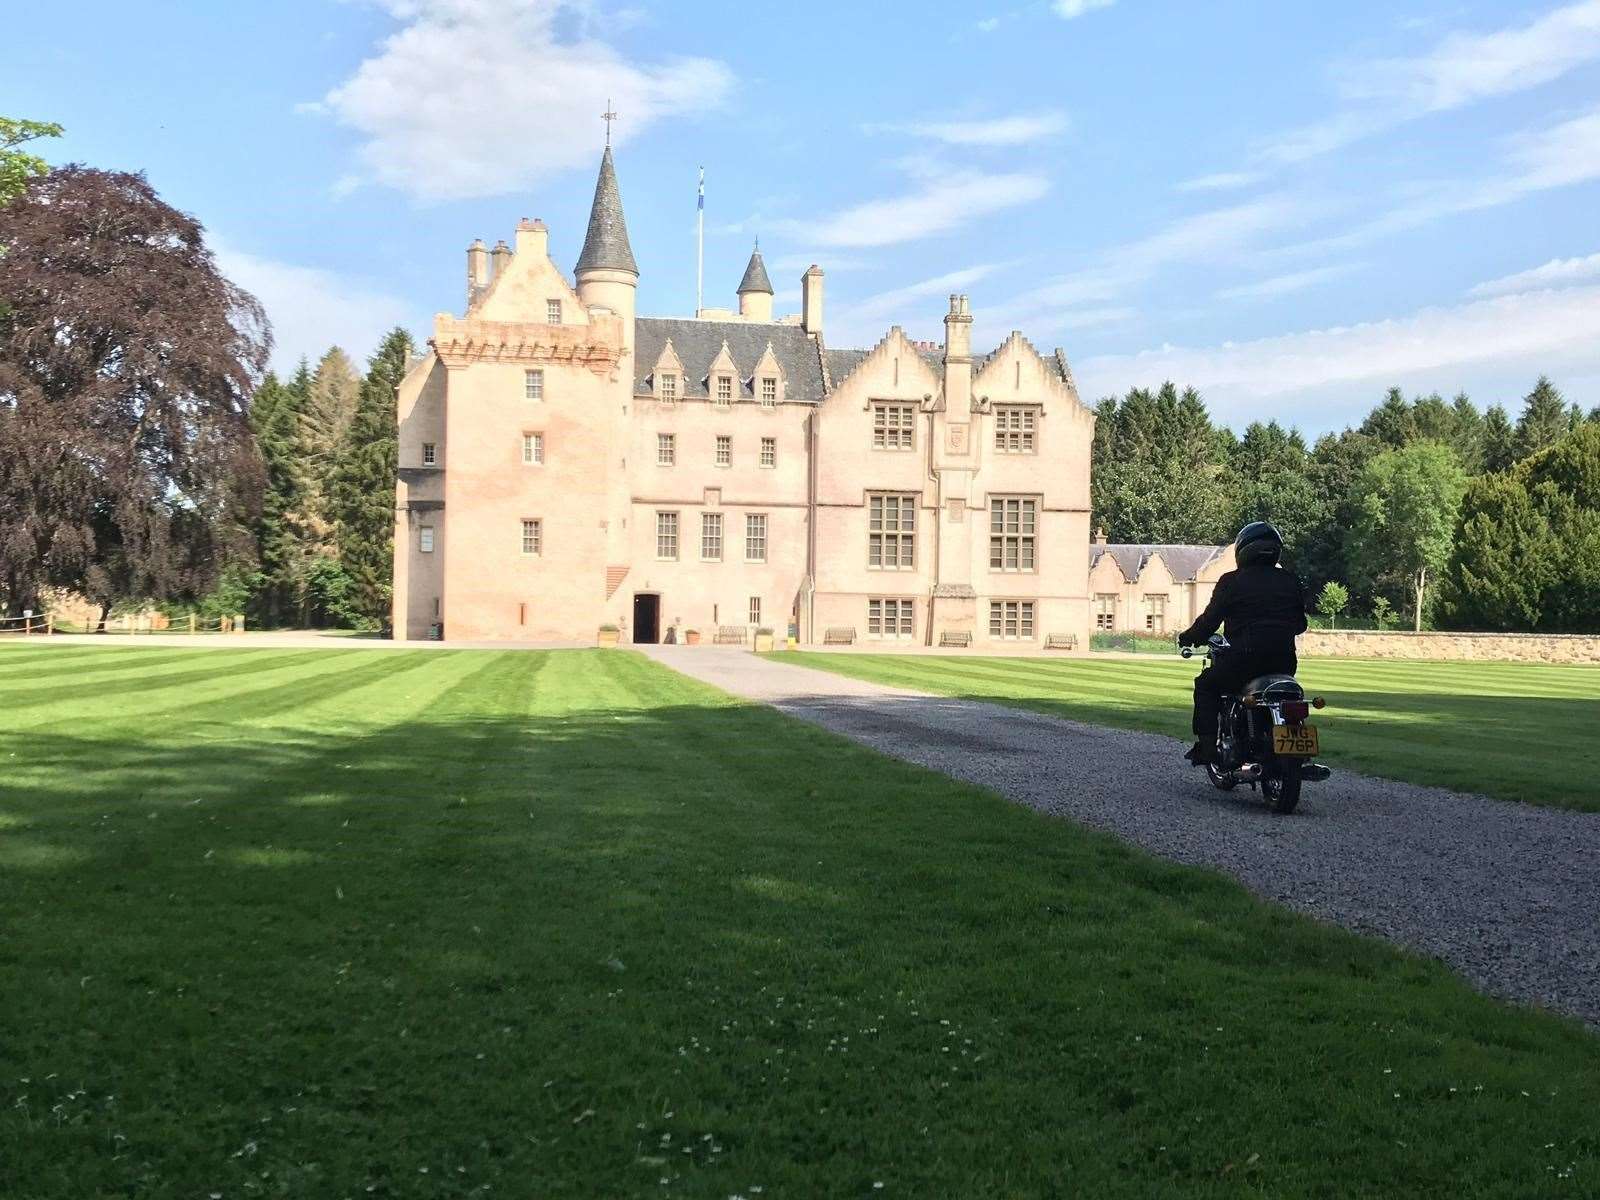 Brodie Castle will provide the perfect backdrop for the walk for Parkinson's.